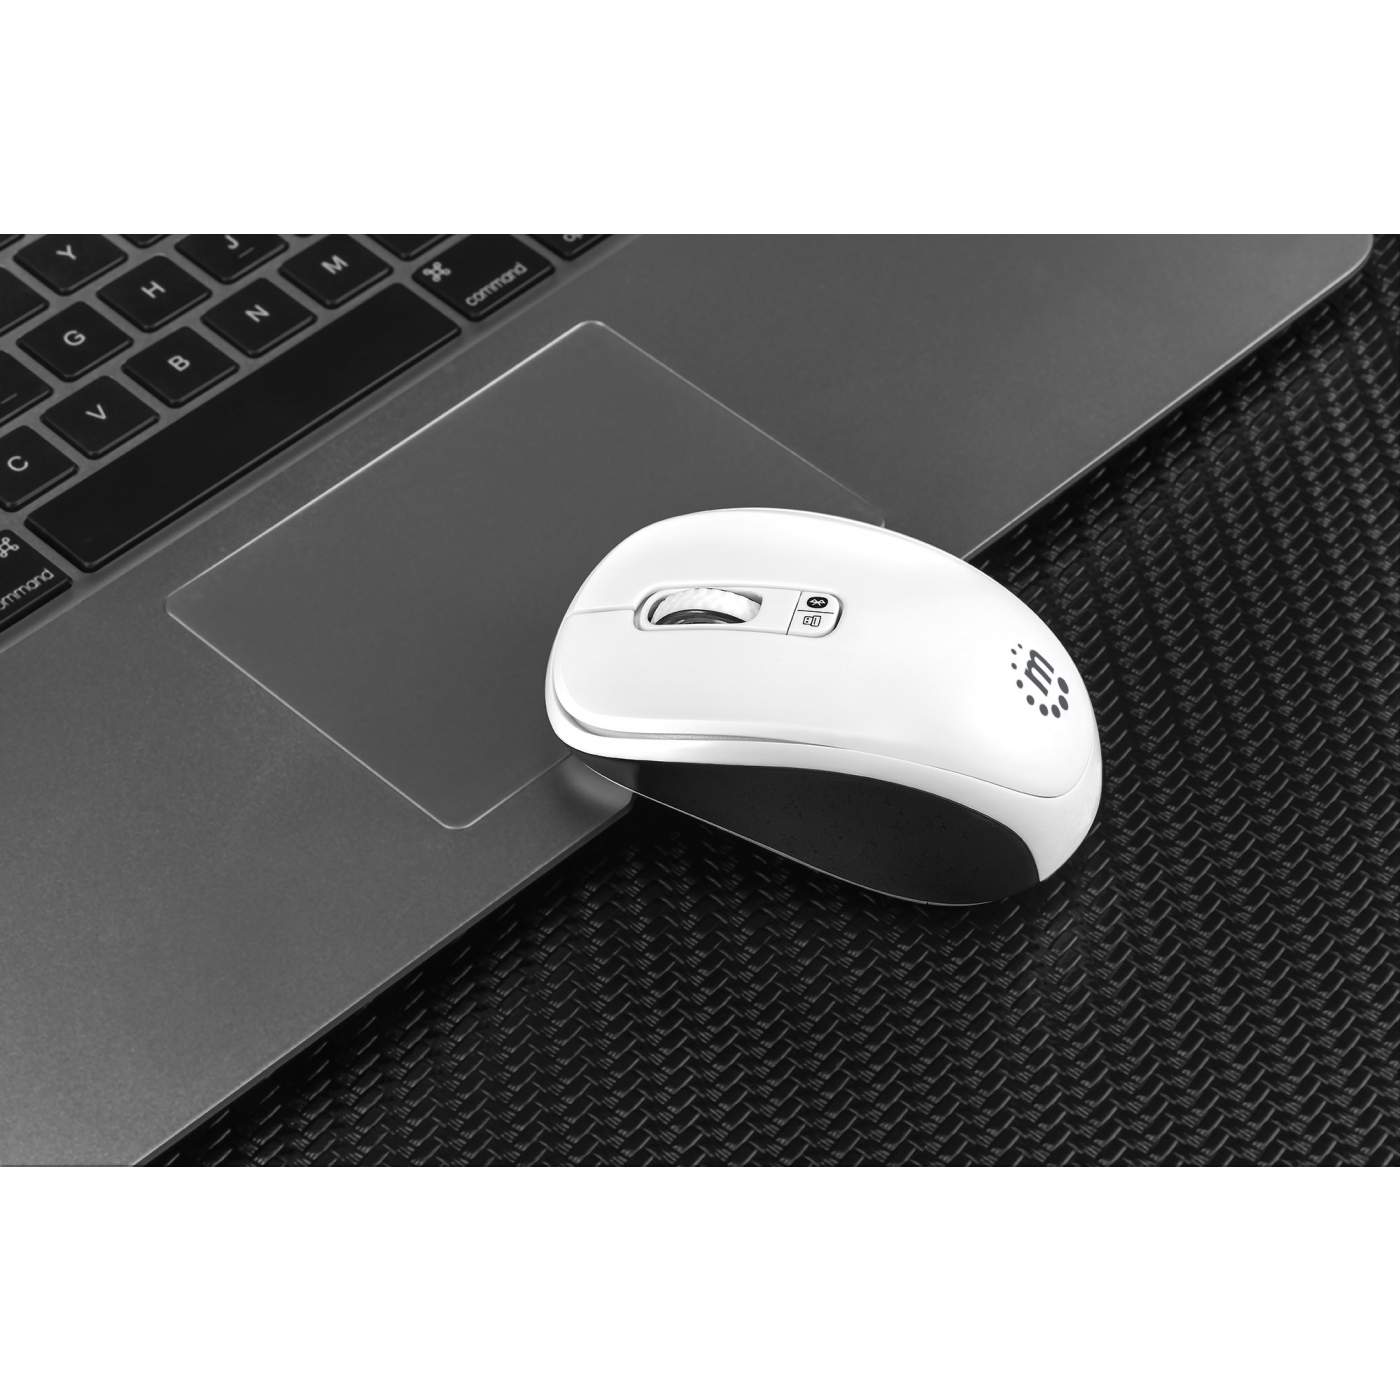 Dual-Mode Mouse Image 9